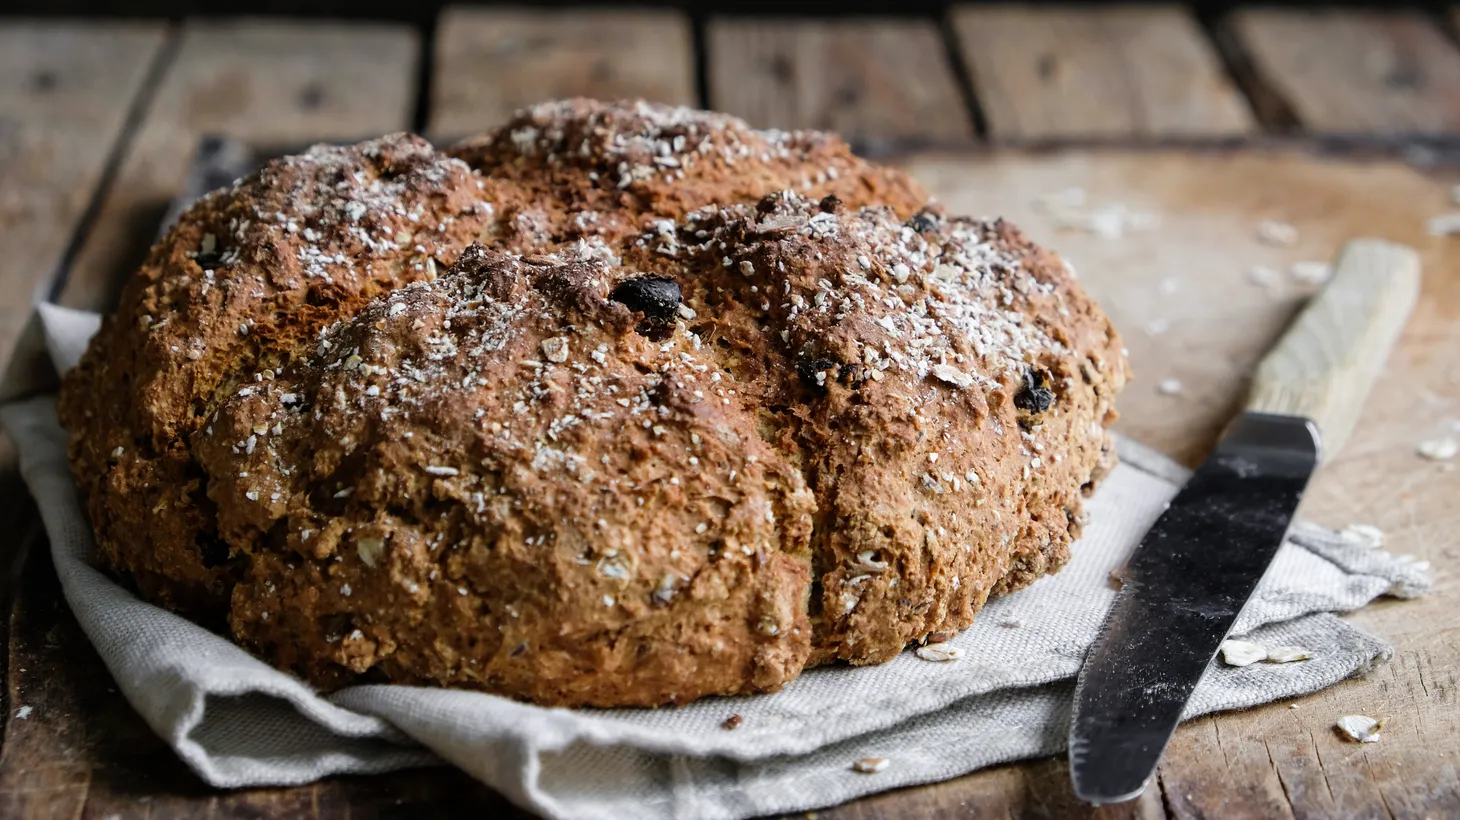 Traditional Irish soda bread was made simply with whole wheat flour, baking soda, buttermilk and salt. Currants or raisins were considered a luxury.